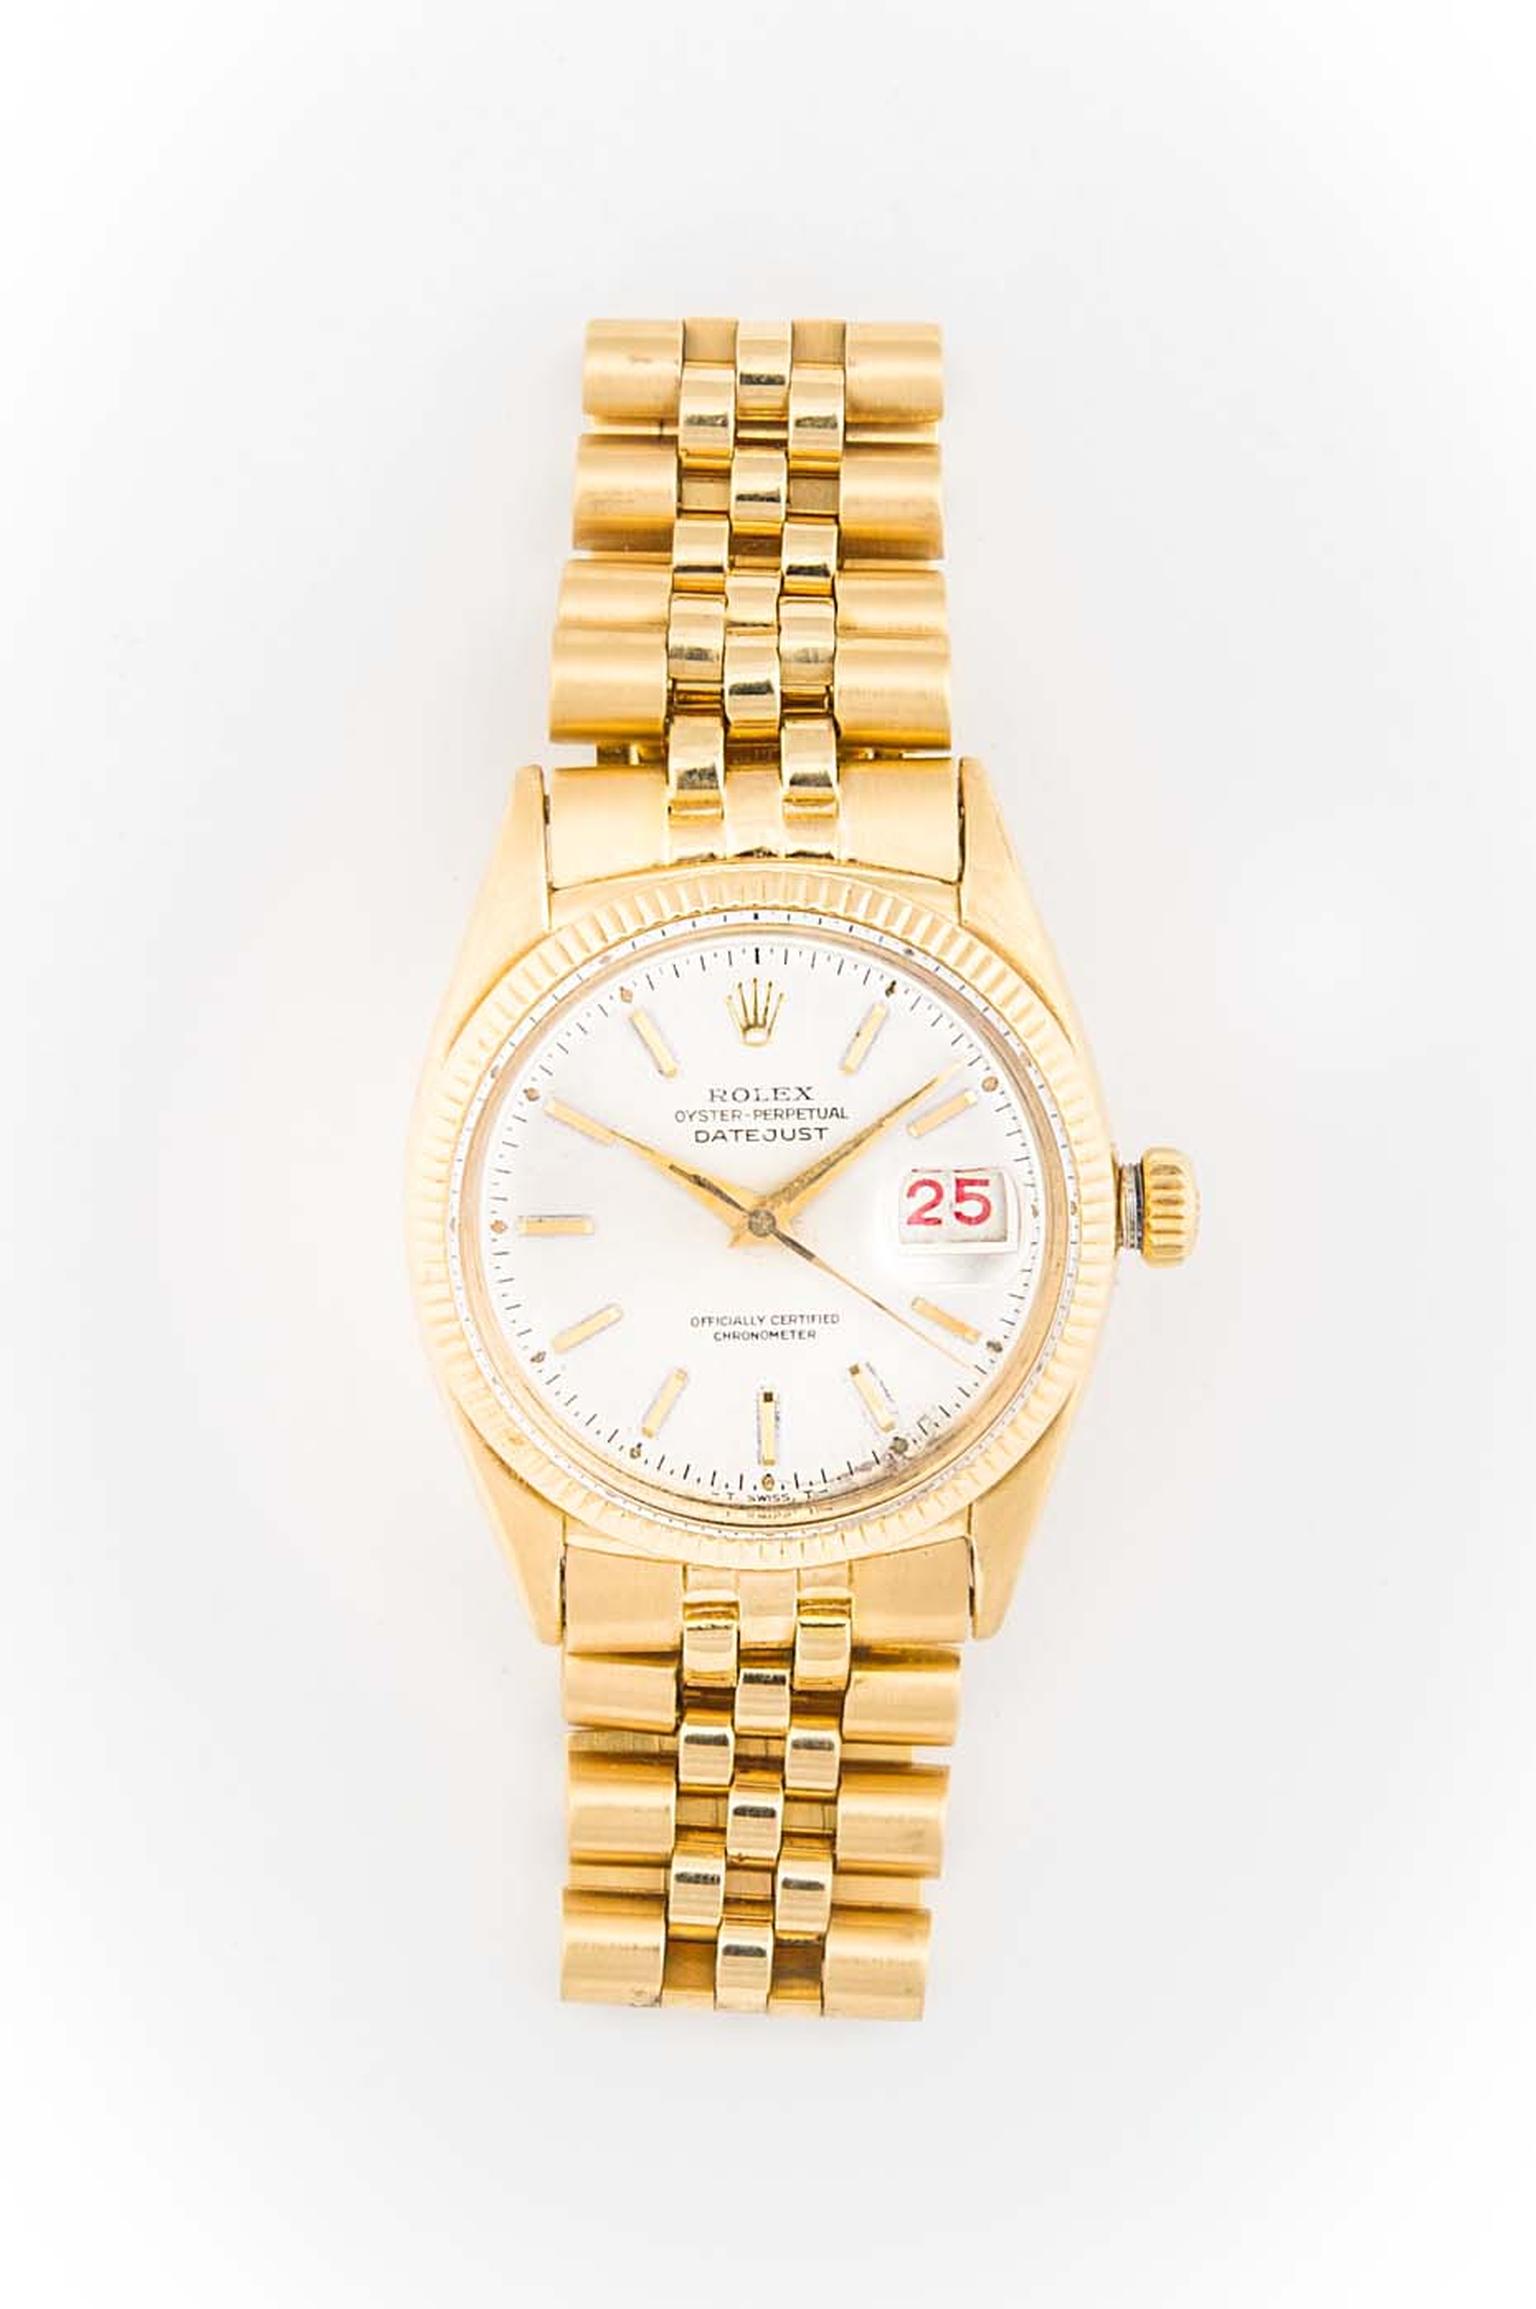 A Rolex gold Datejust watch that once belonged to the 34th President of the United States, Dwight D Eisenhower, is expected to fetch US$1 million when it is sold this September by RR Auction in Boston, Massachusetts.